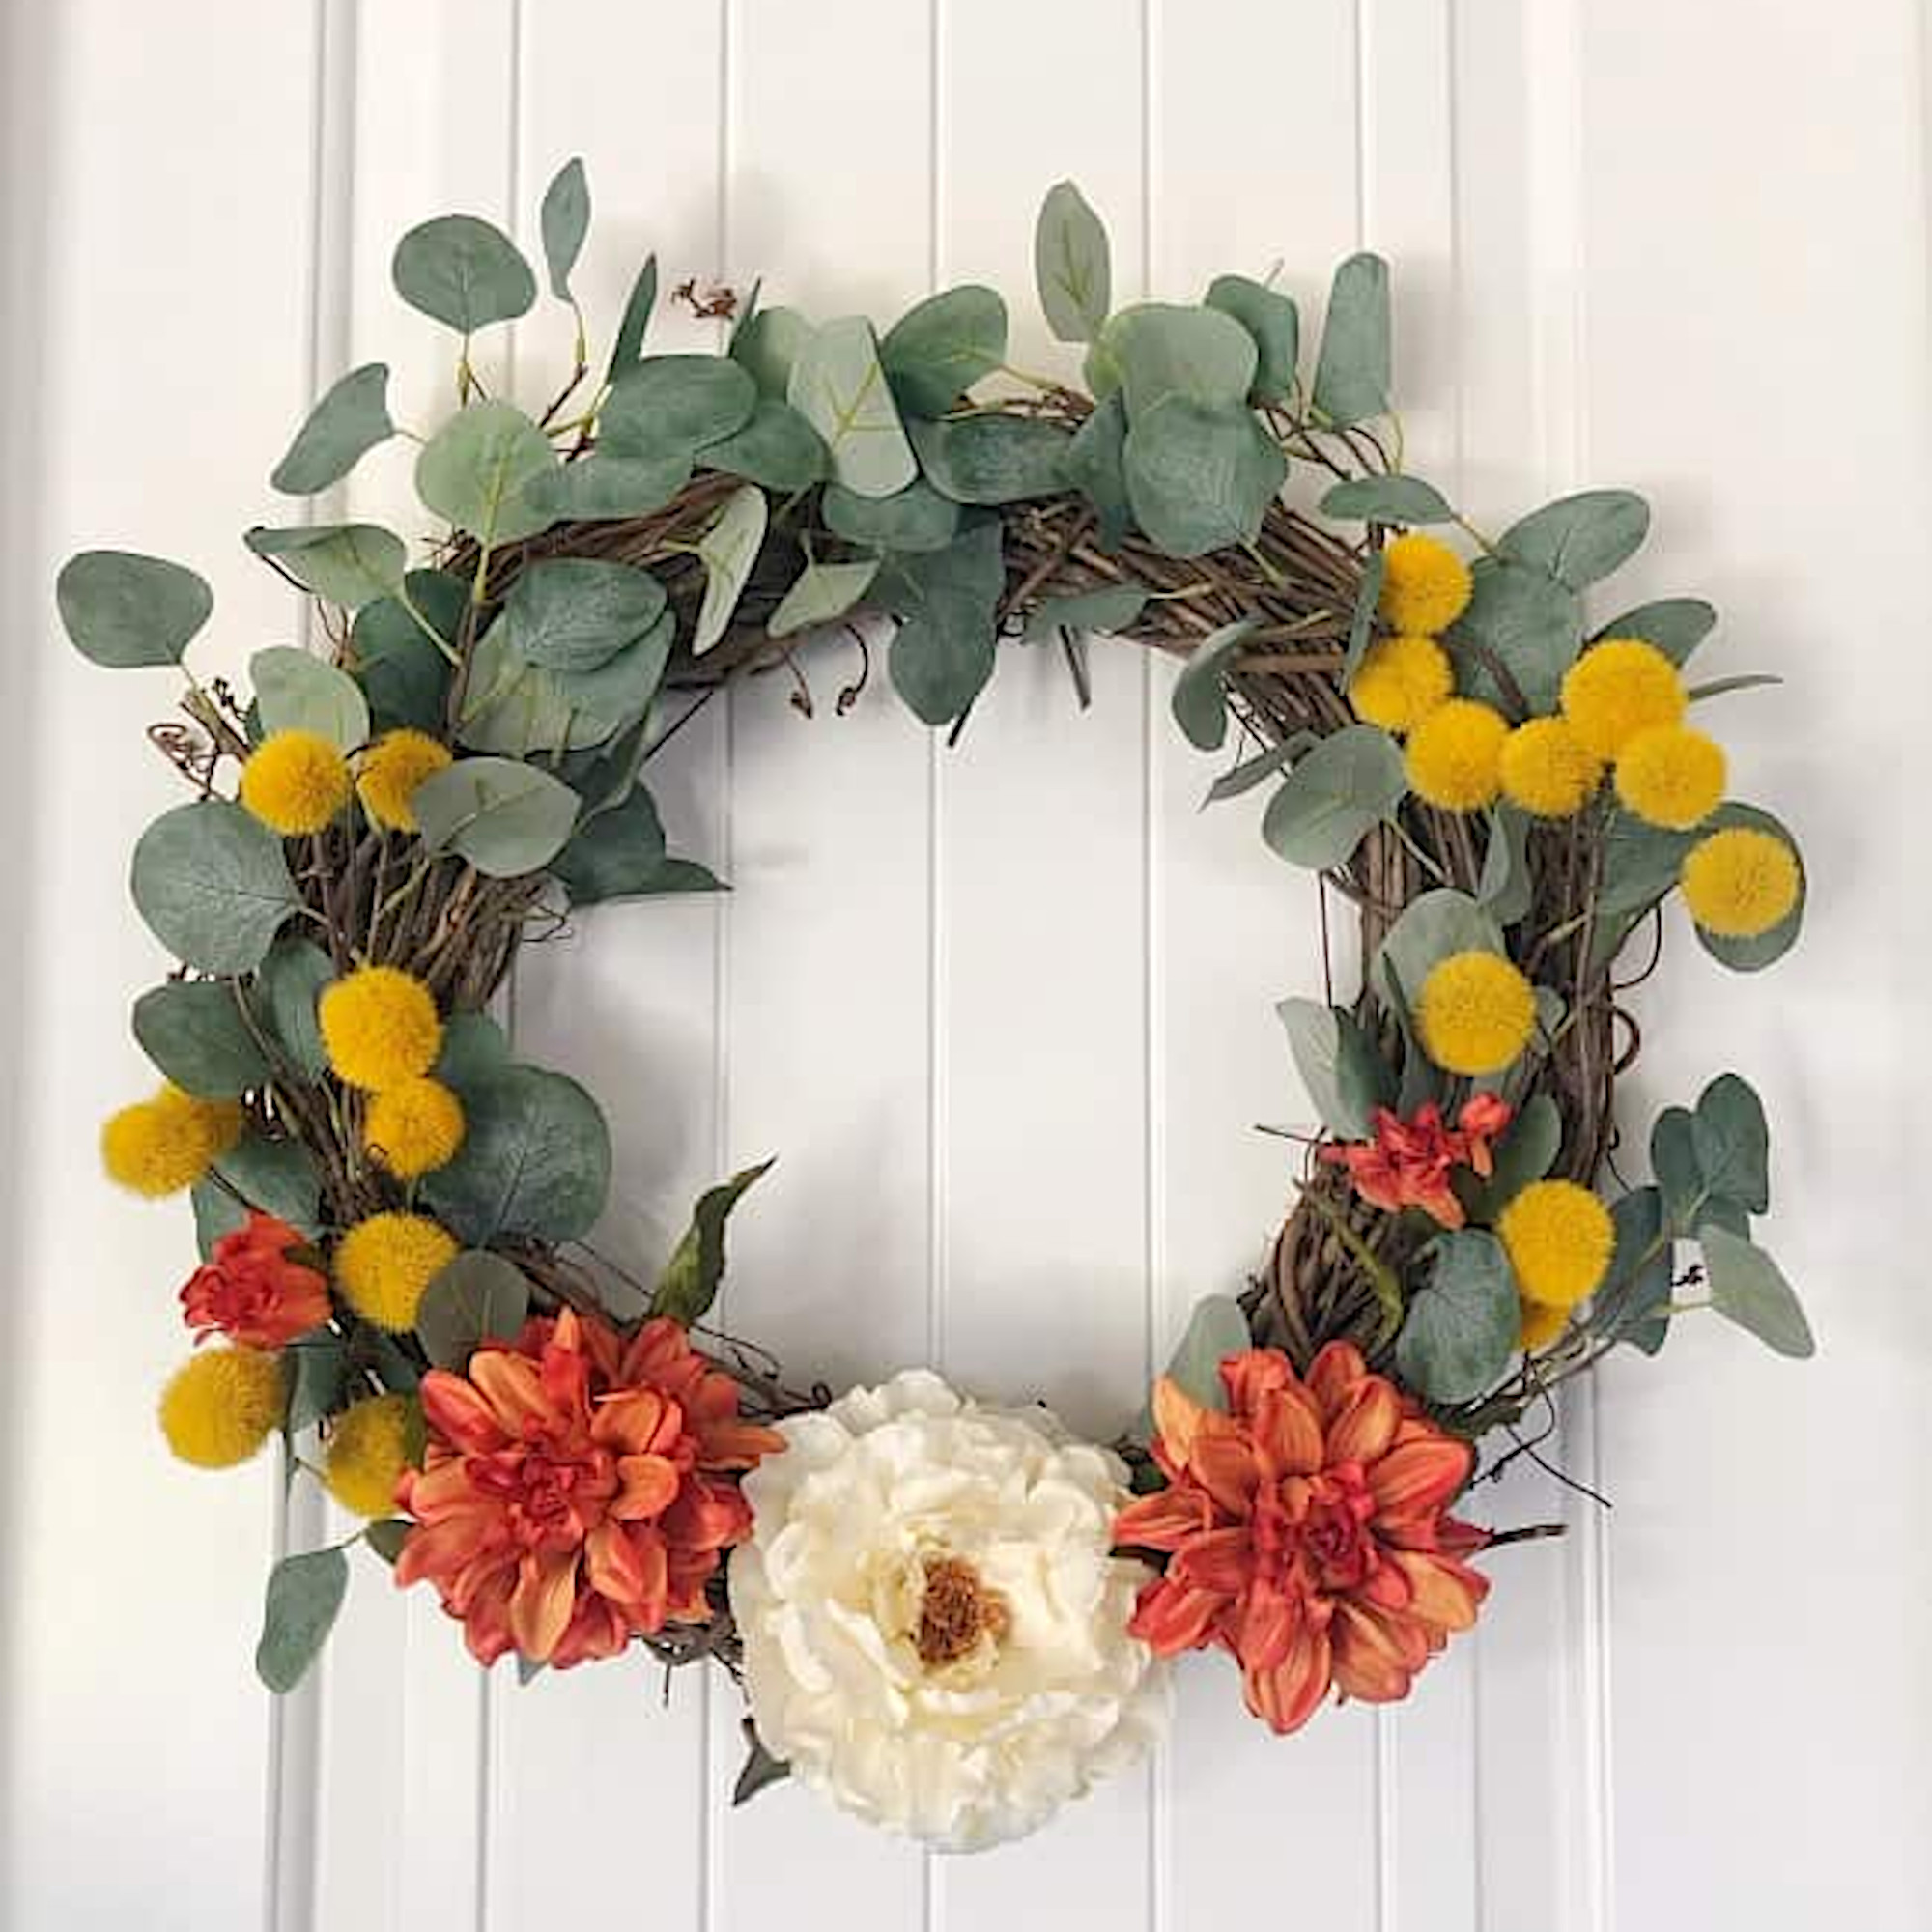 9 Grapevine Wreaths: Projects For Every Season - Aubrys Crafts